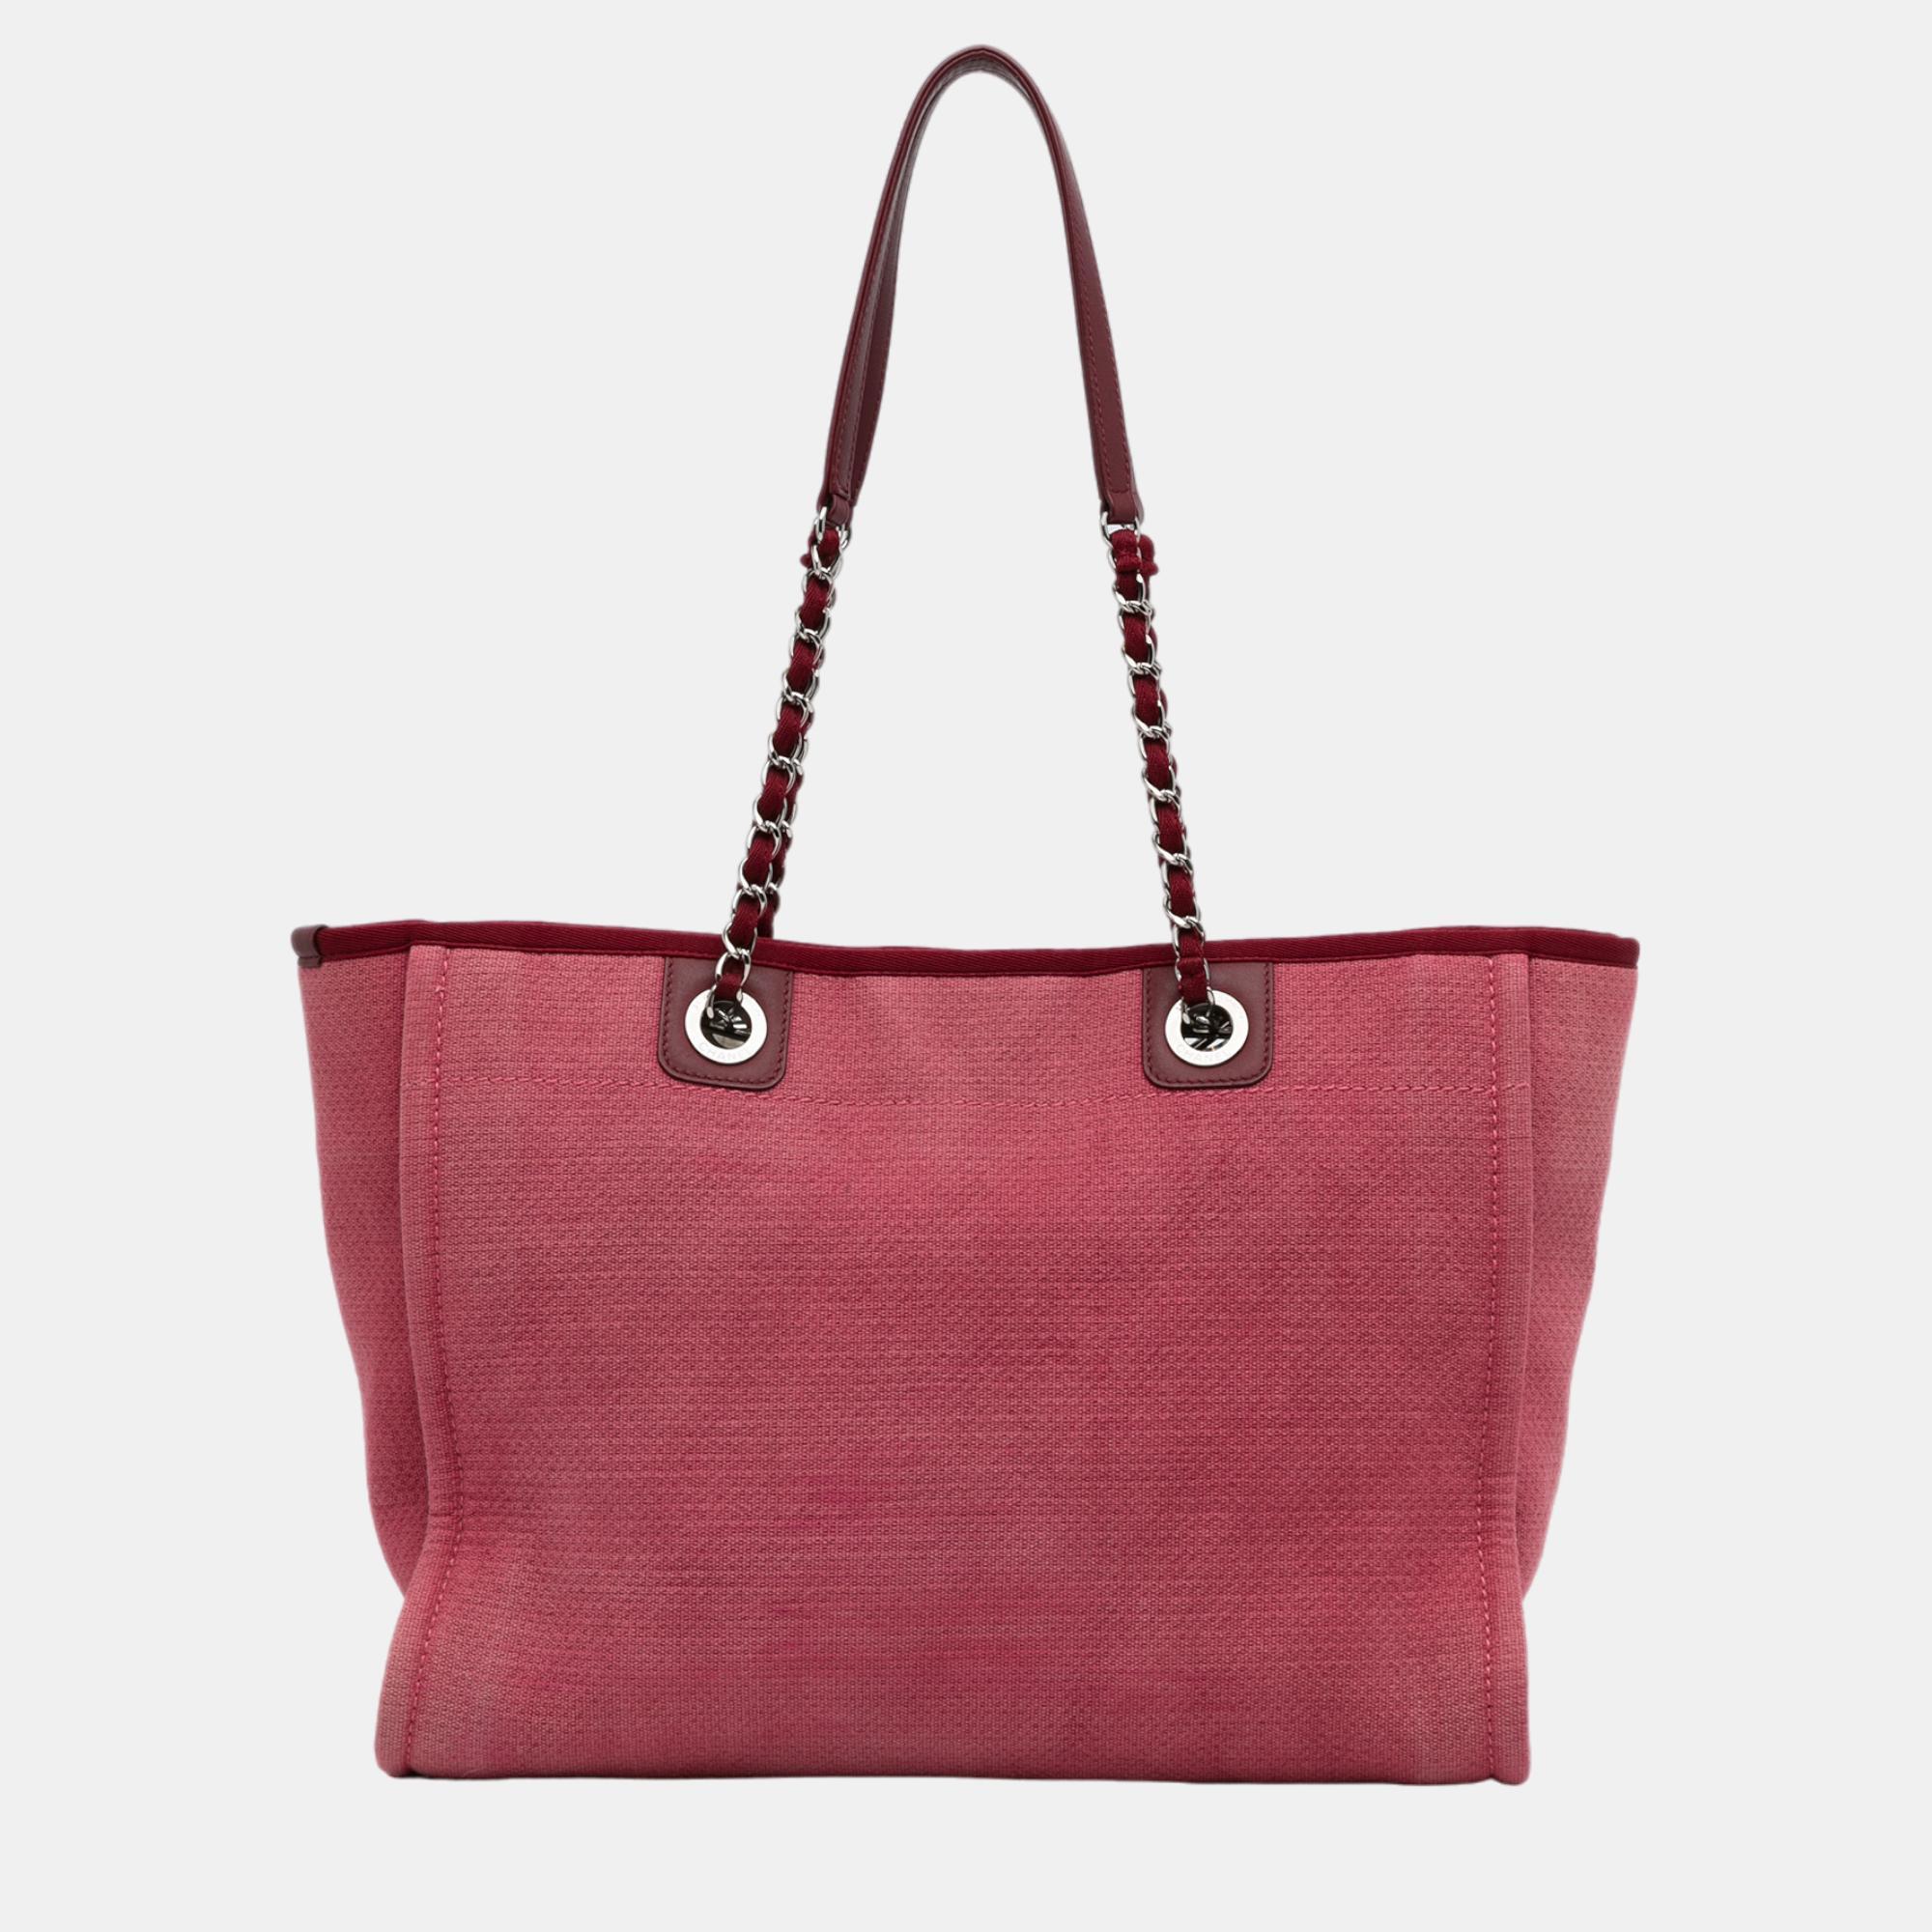 Chanel Red Deauville Tote